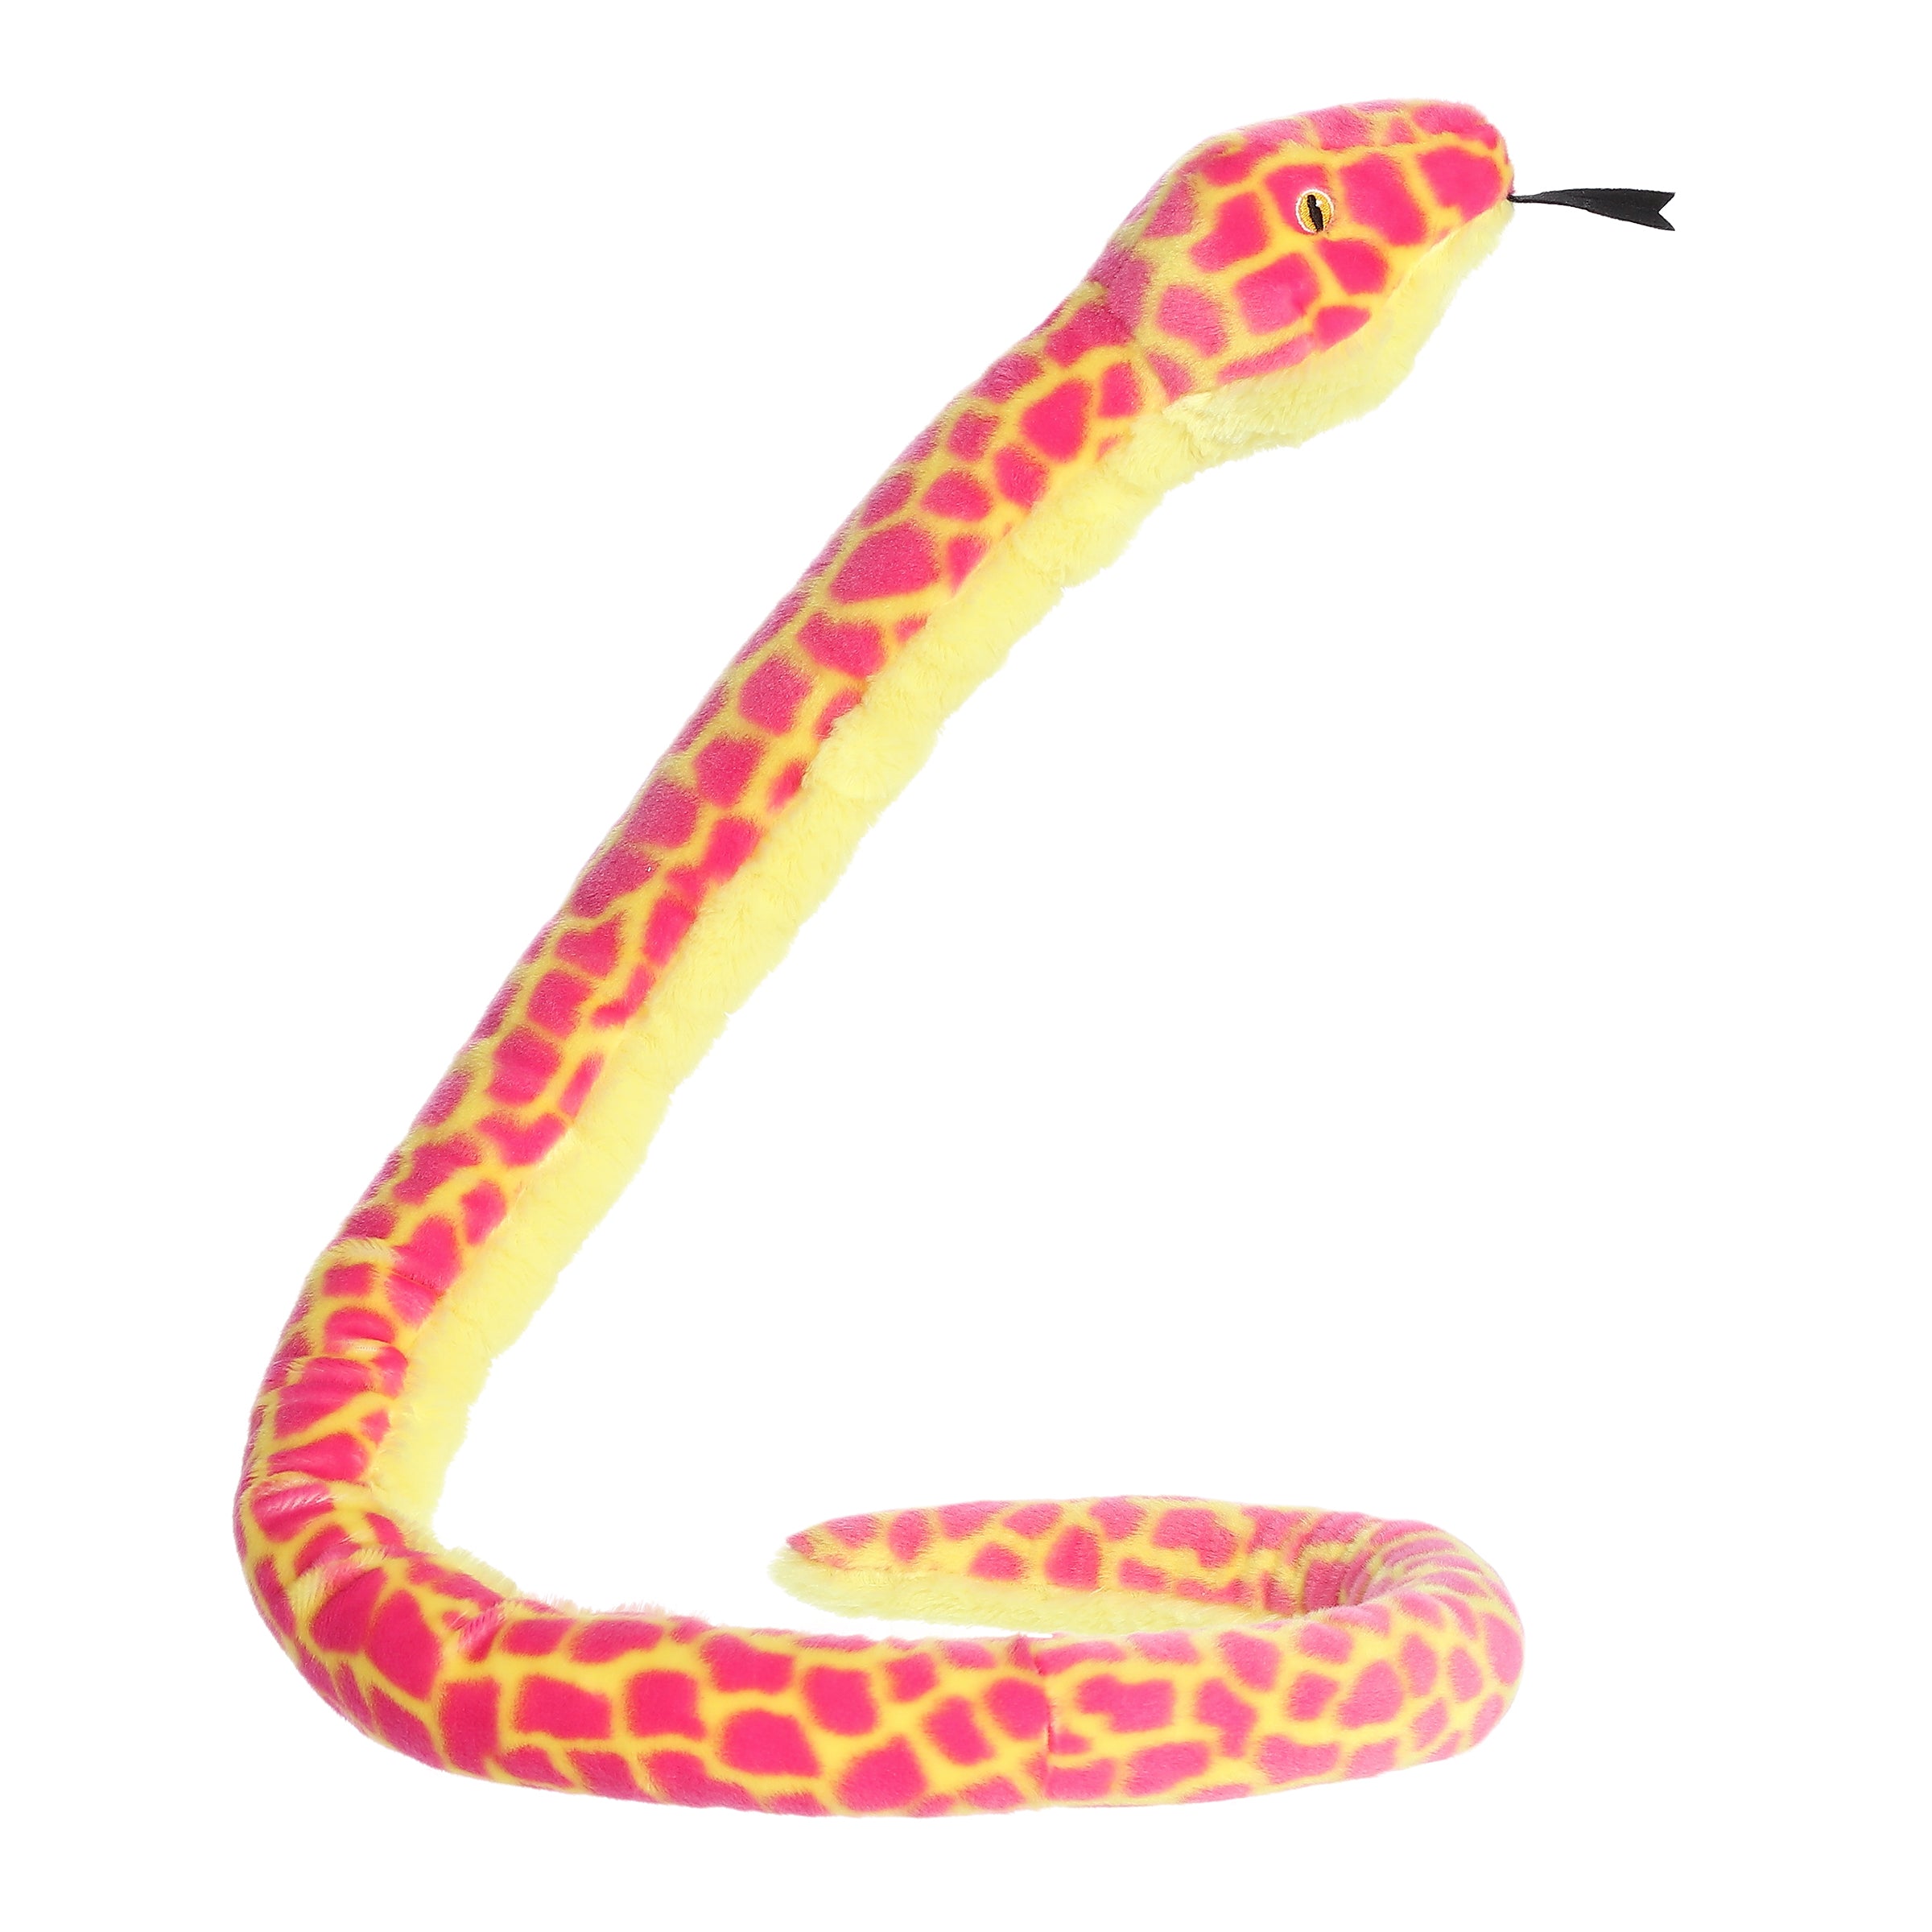 A long colorfully patterned snake stuffed animal plush that has a light yellow body with pink-colored scales along its back.